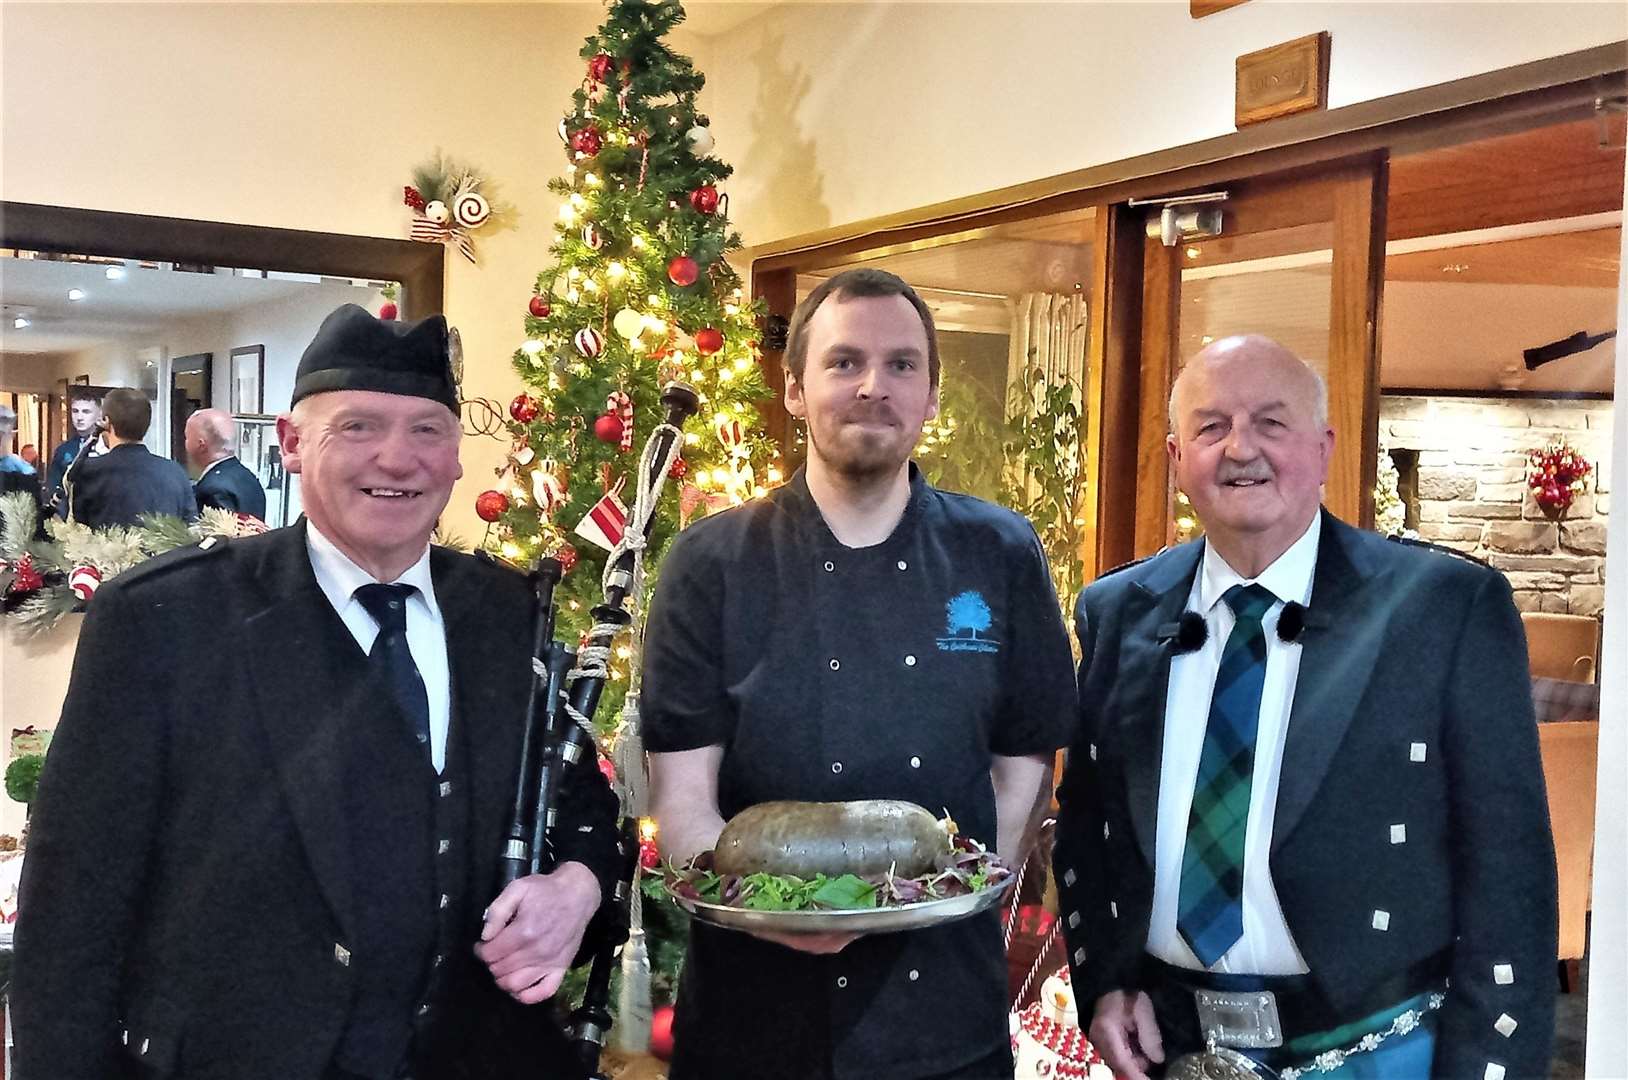 A full house at the Norseman Hotel Wick awaits the arrival of the haggis piped in by Alasdair Miller (left), carried by chef Phil Overton (centre) and addressed by Willie Mackay at right.